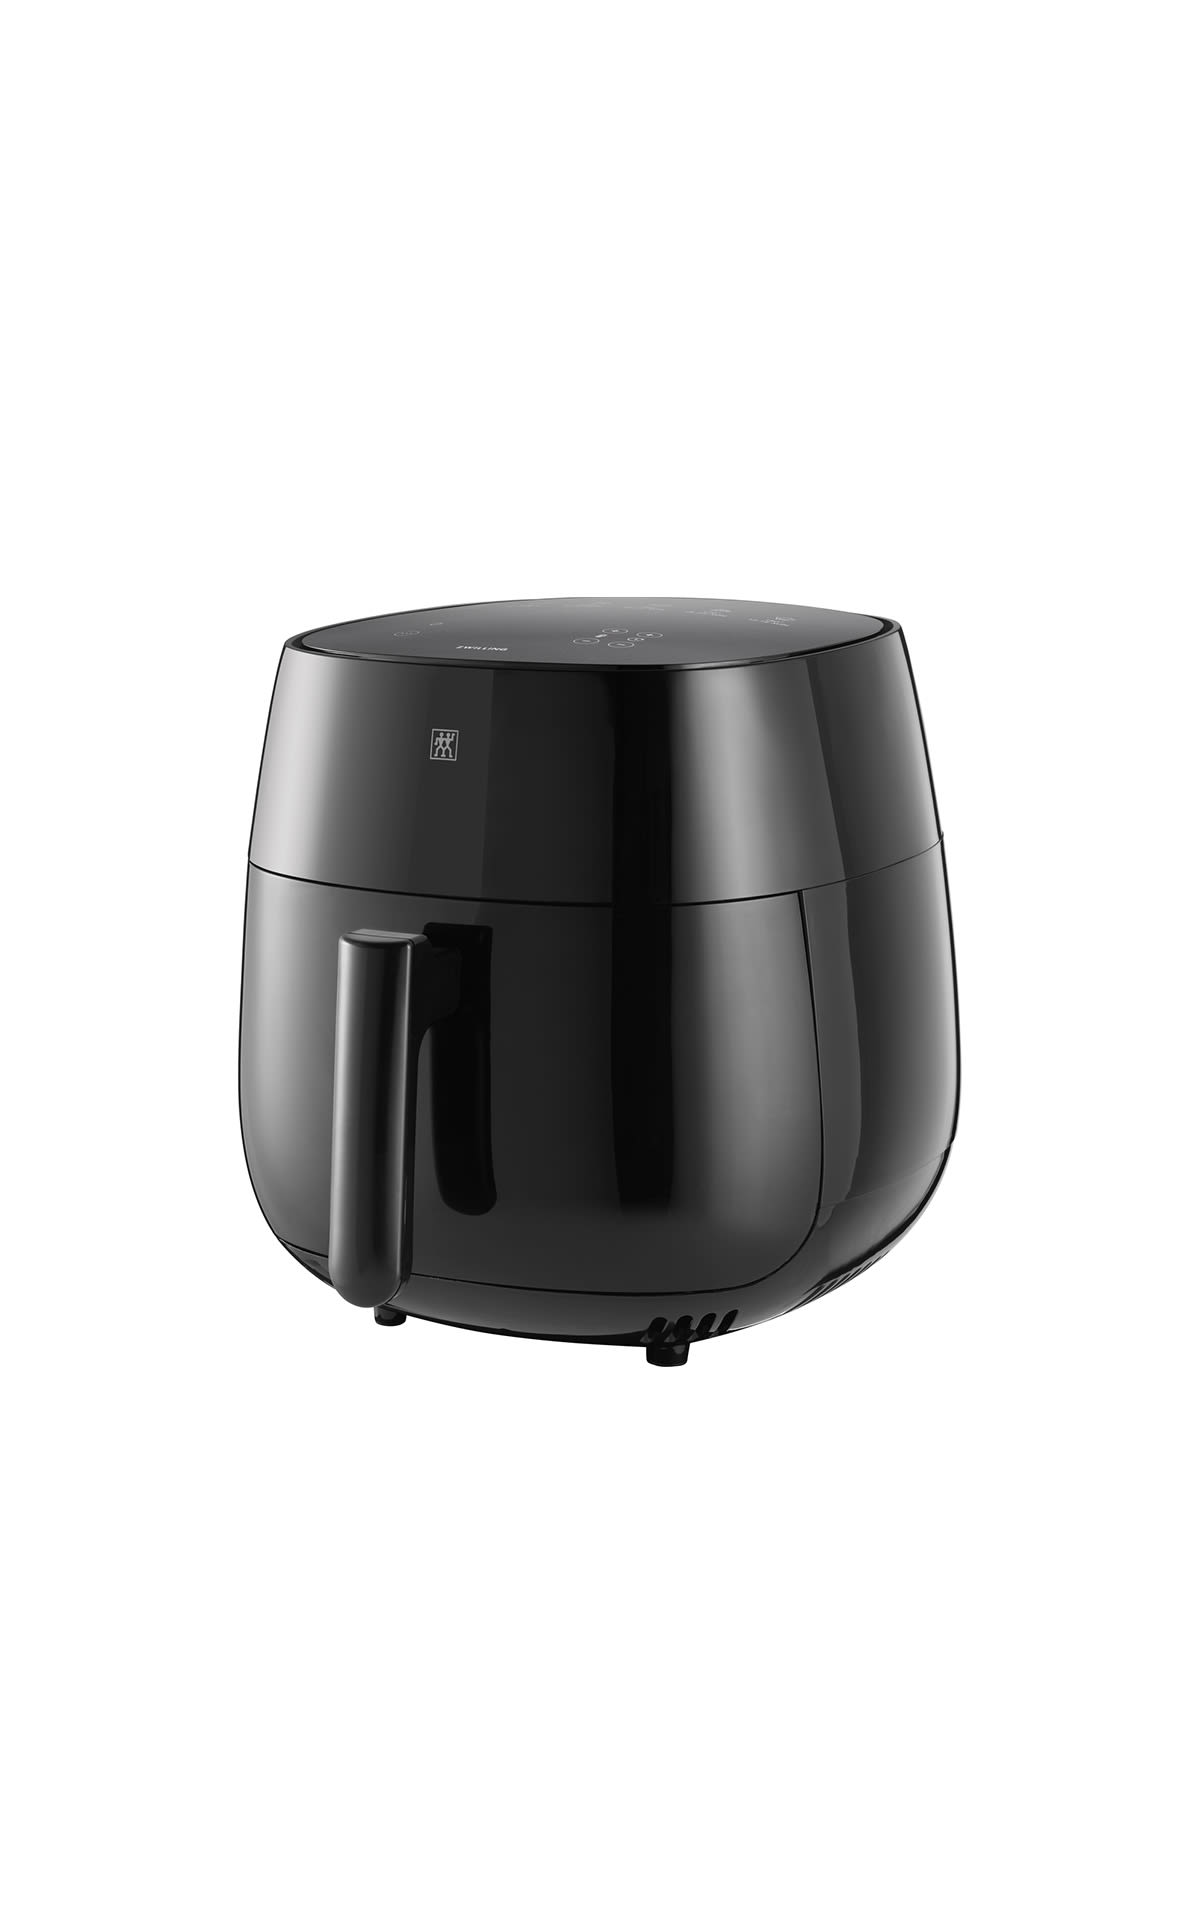 Zwilling air fryer